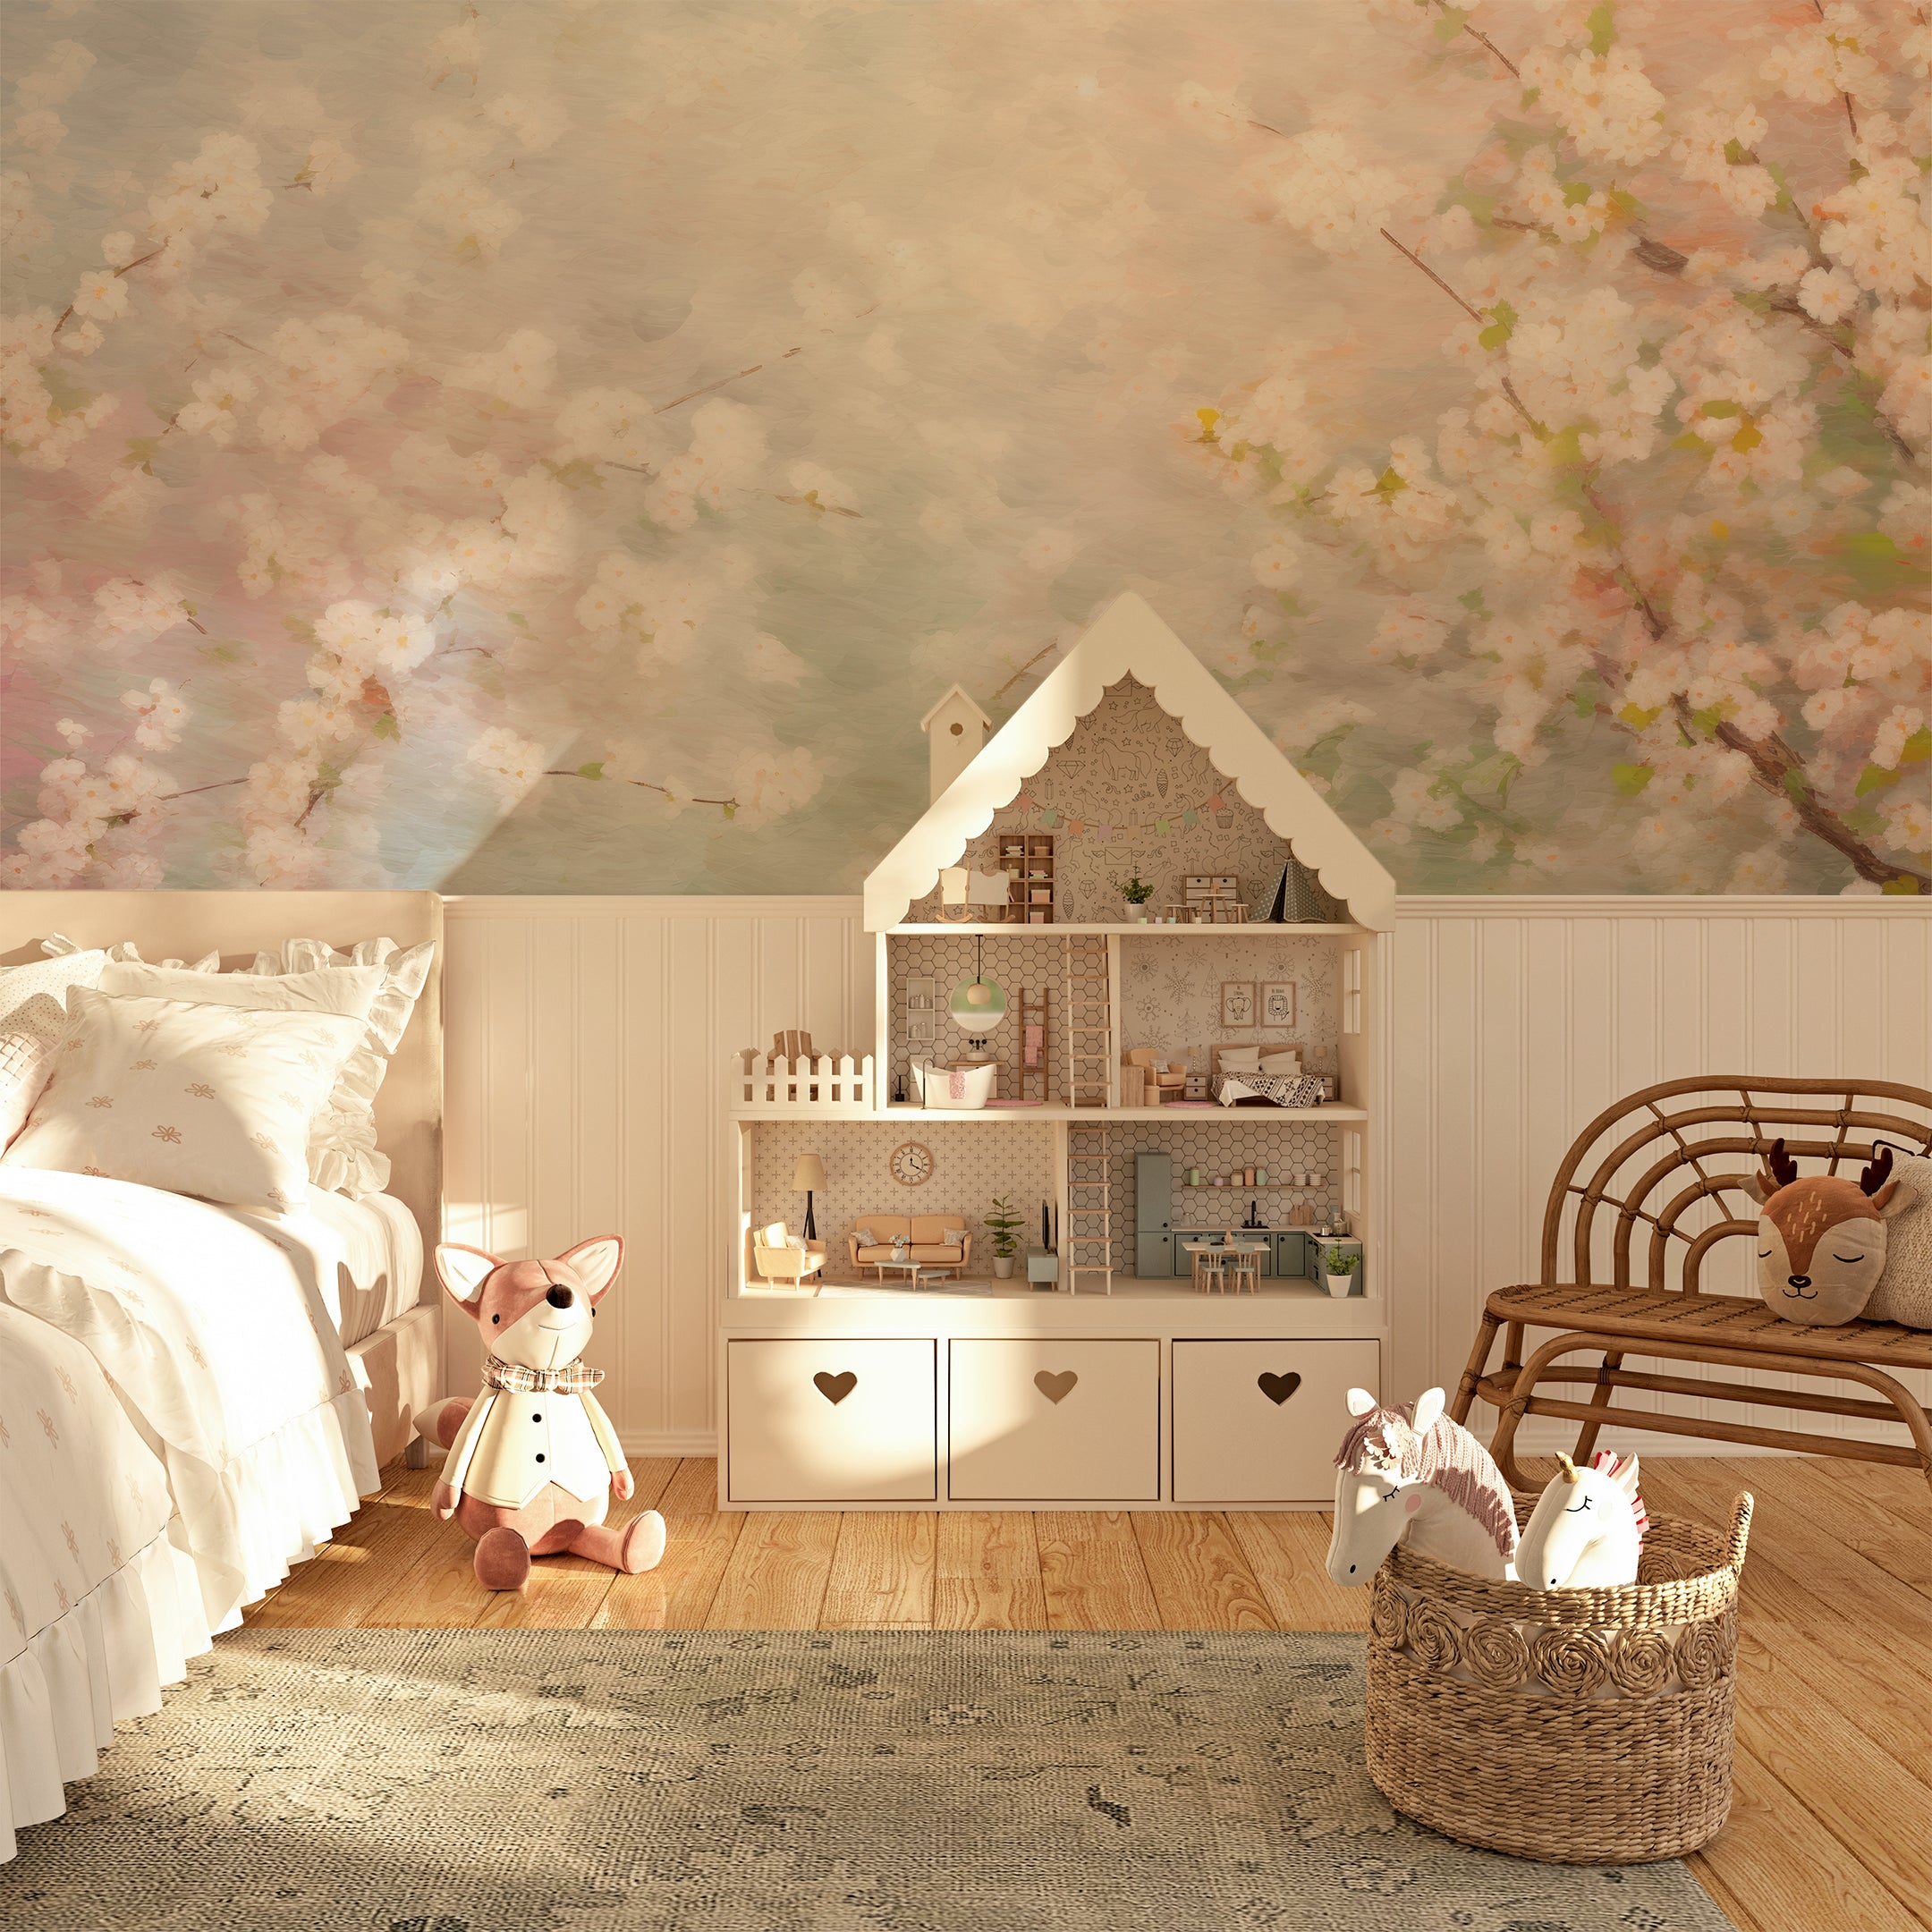 Warm and inviting nursery room featuring pastel blossom mural and plush toys